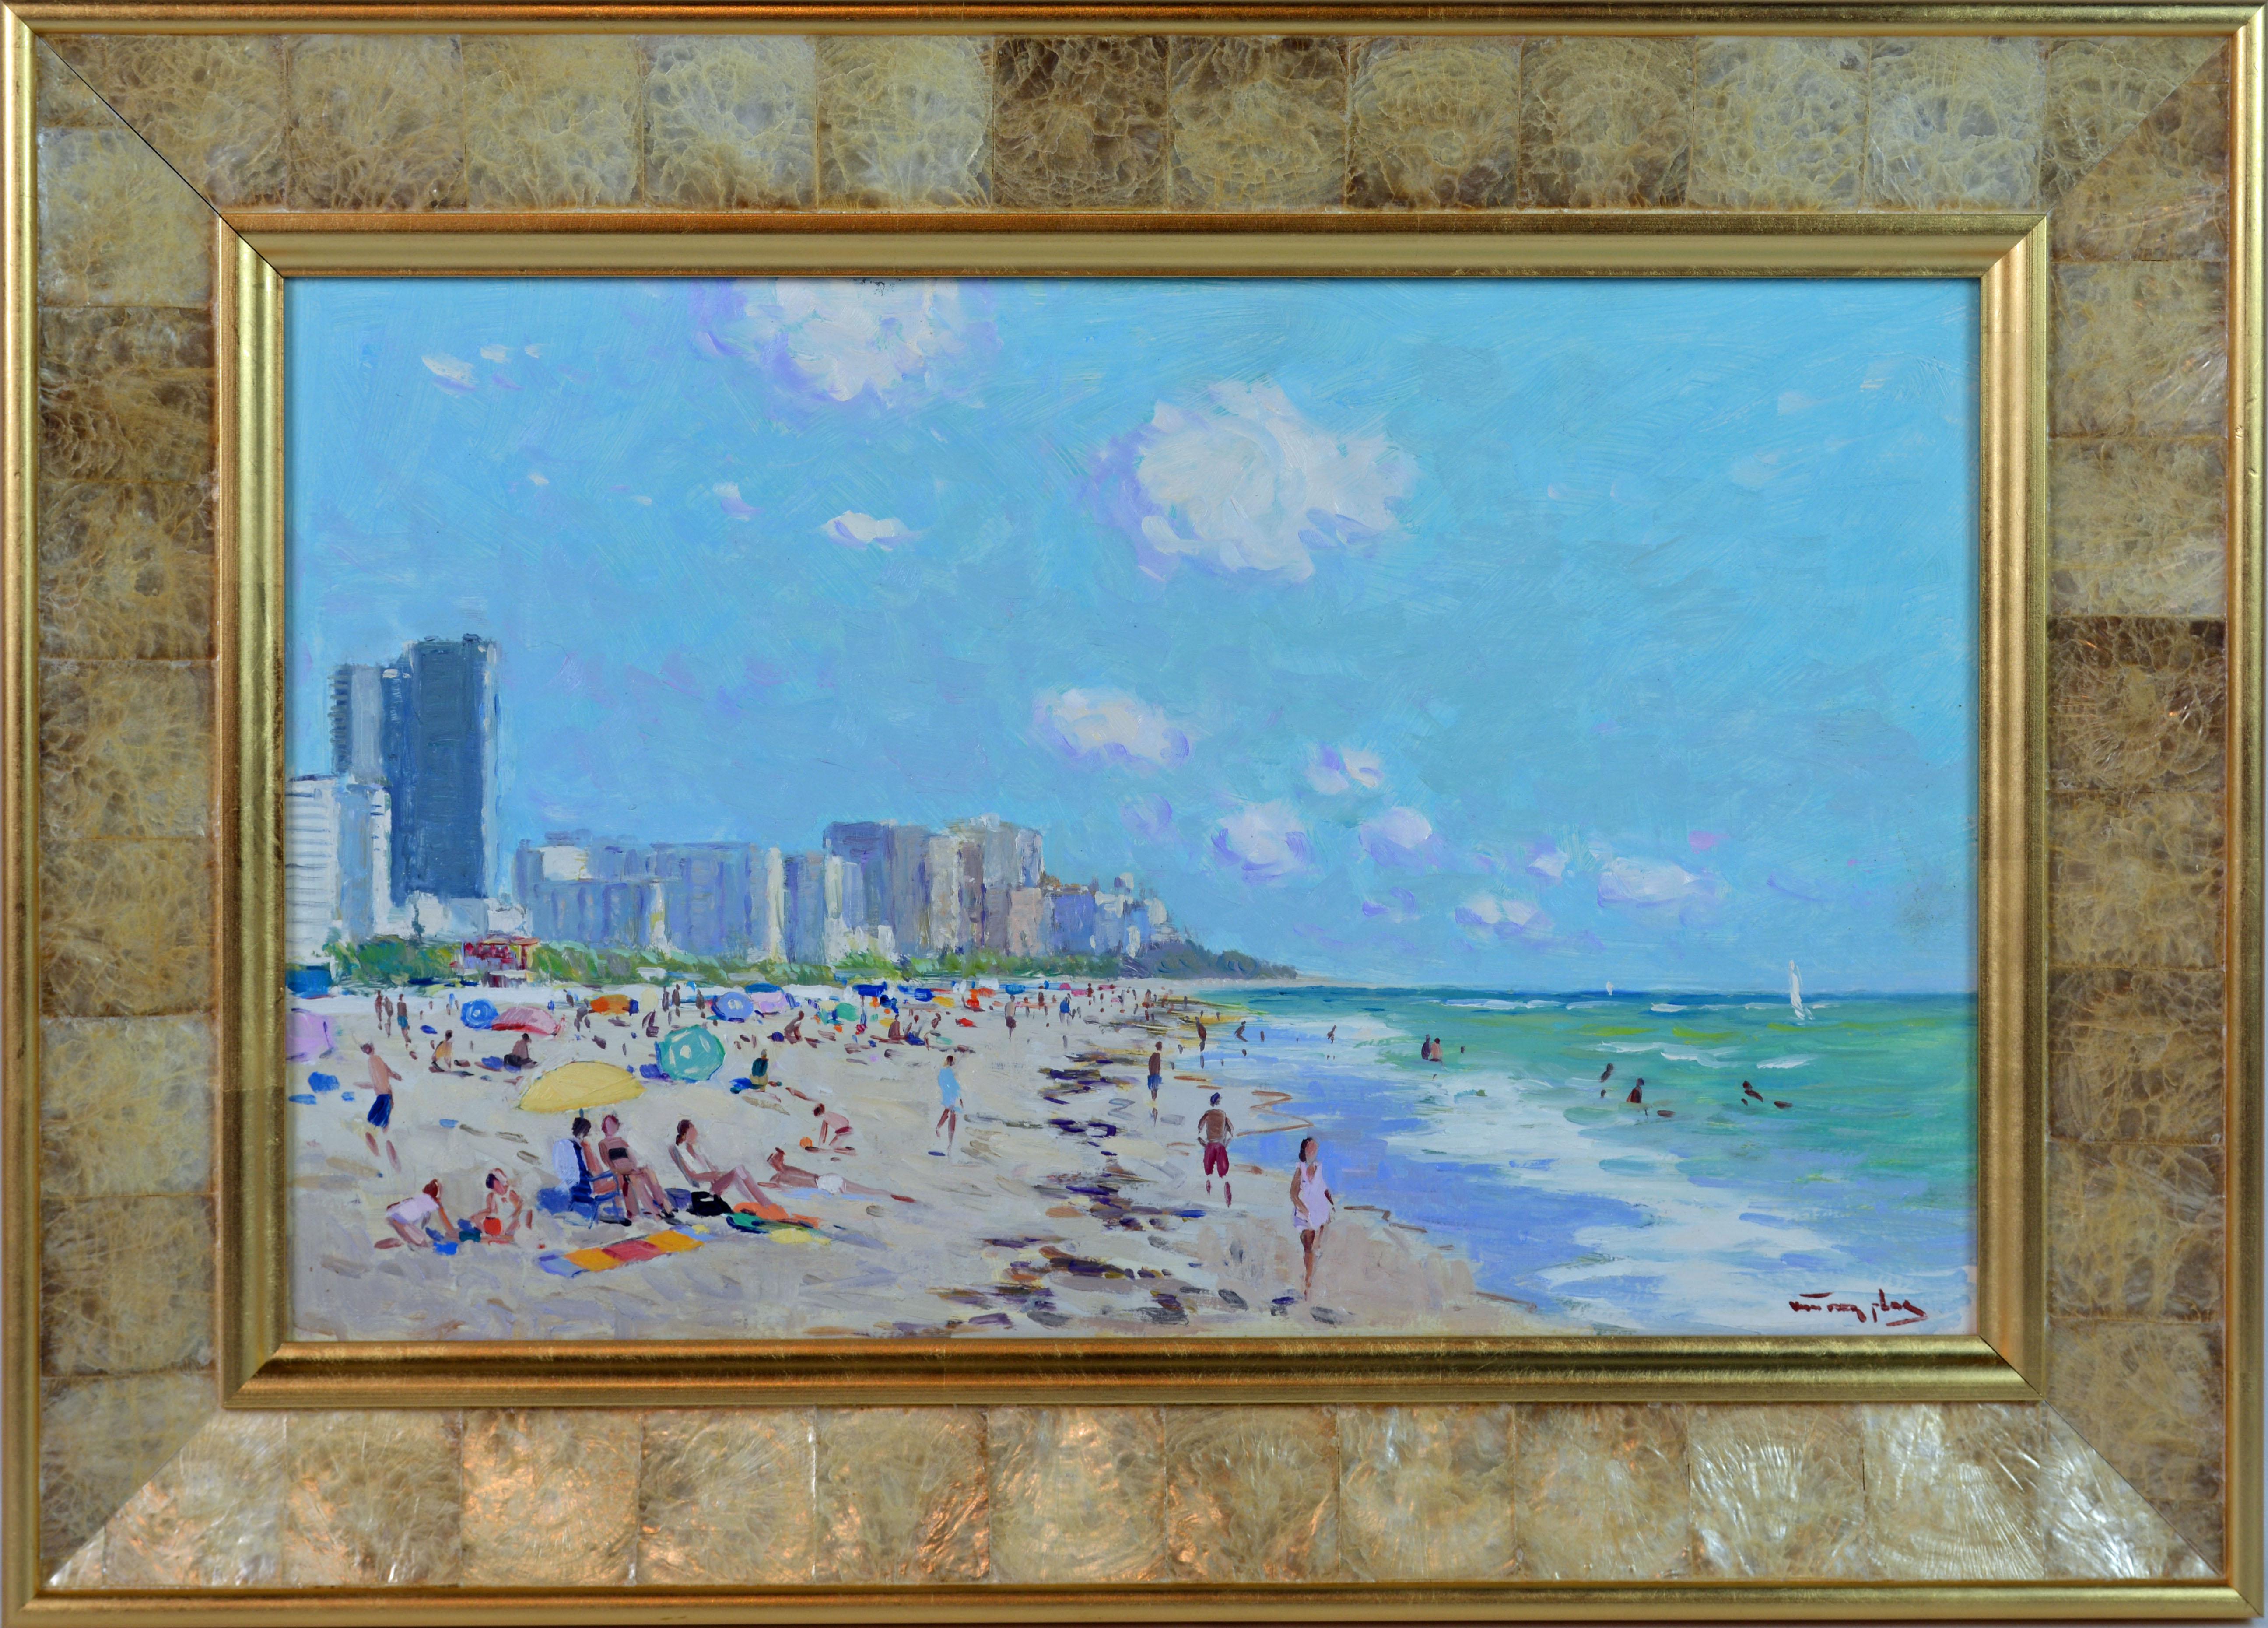 'Miami Beach, Florida'
By Niek van der Plas, Dutch b. 1954.
12 x 19 in. without frame, 18 x 25 in. including frame.
Oil on panel. Signed in lower right corner.
Housed in a Mother of Pearl inlaid gilt wood frame.

Niek van der Plas continues to